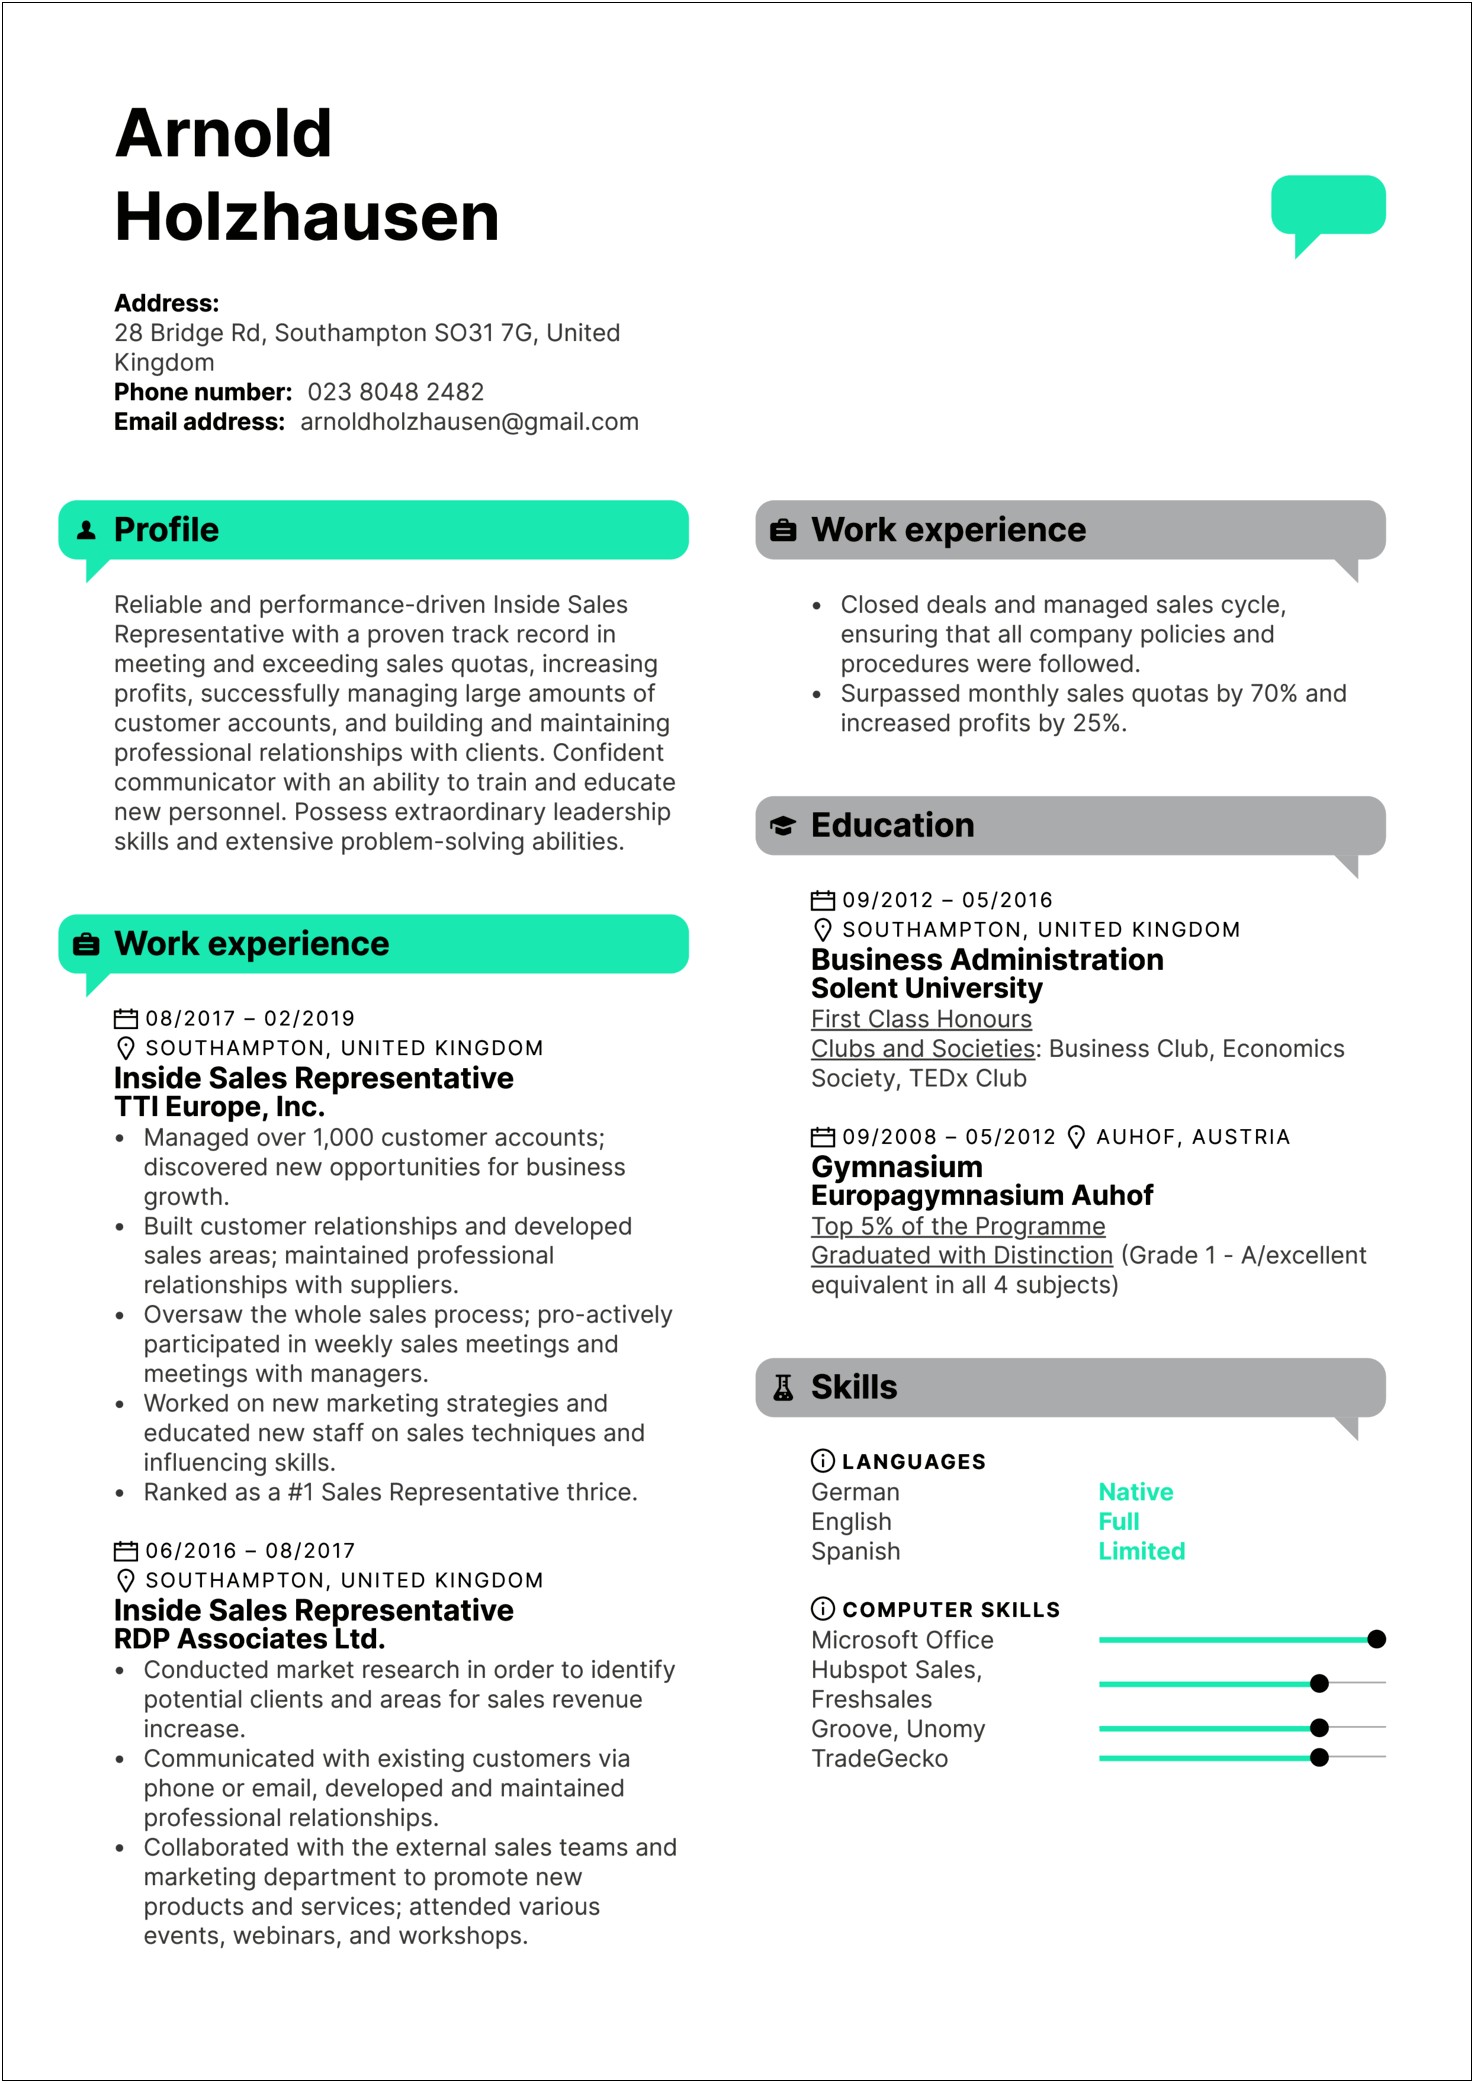 Real Estate Sales Agent Resume Objective